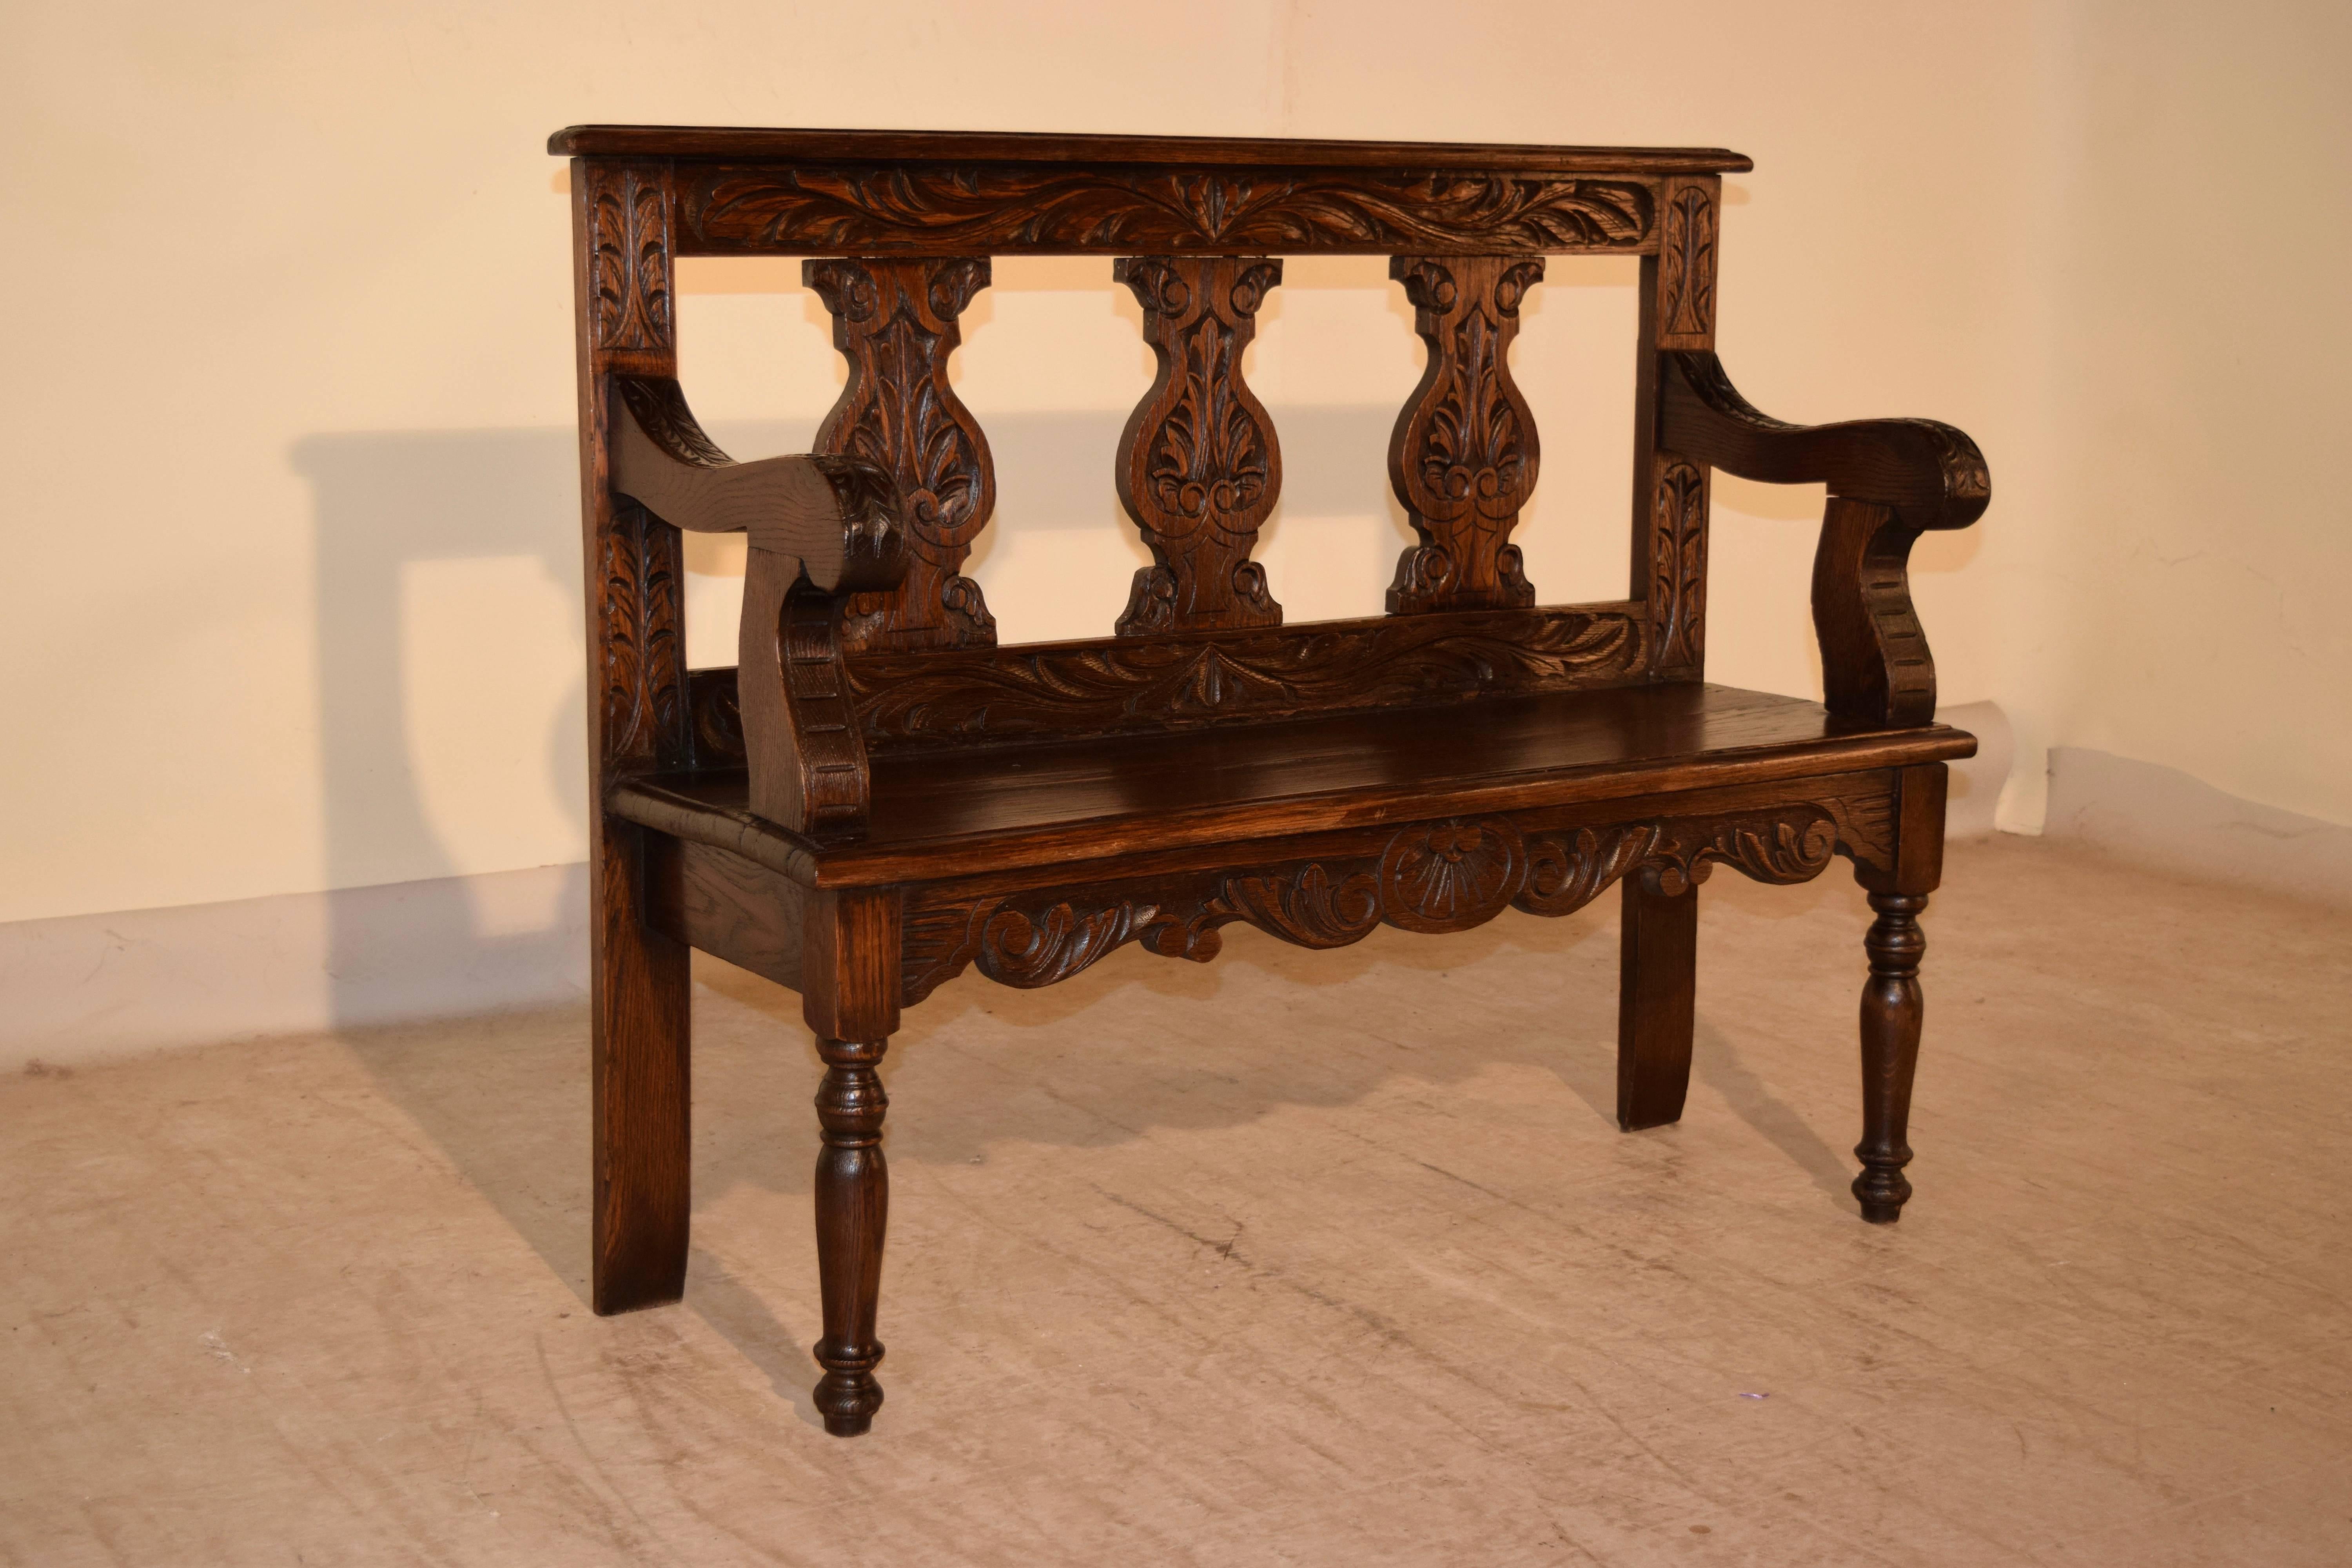 19th century French settee made from oak. The back is carved and has three vase shaped panels, following down to a seat with a bevelled edge along the front, and carved arms. The legs are hand-turned in the front and simple in the back for easy